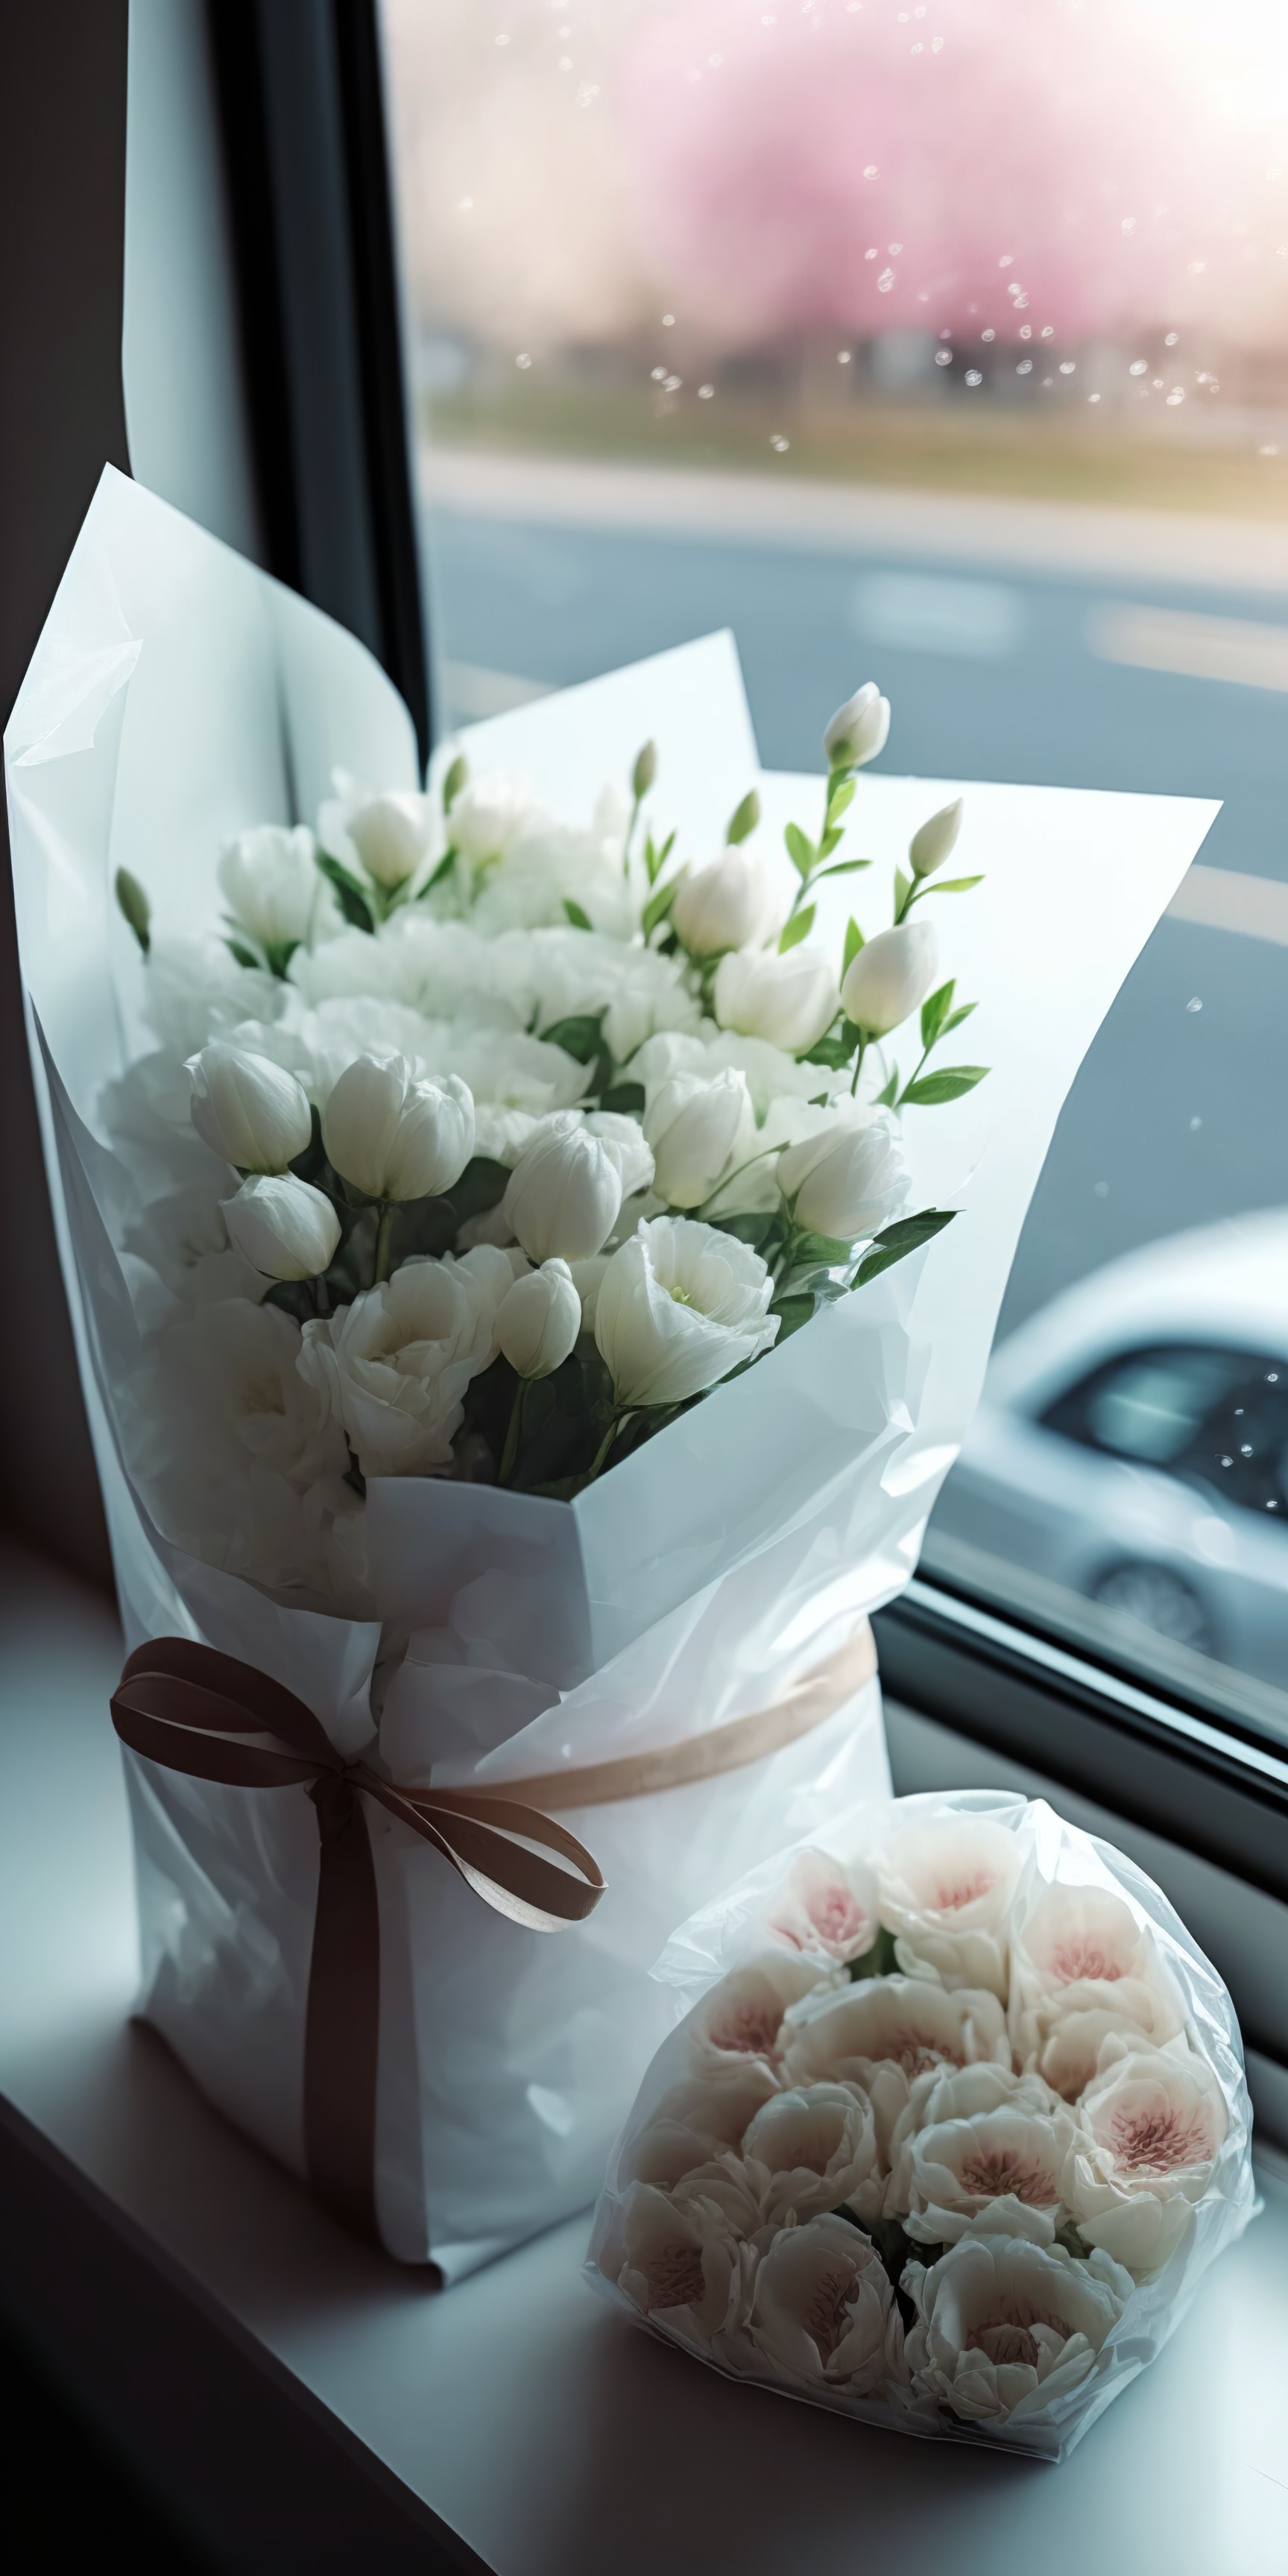 8 images of bouquet of flowers by the window by Midjourney